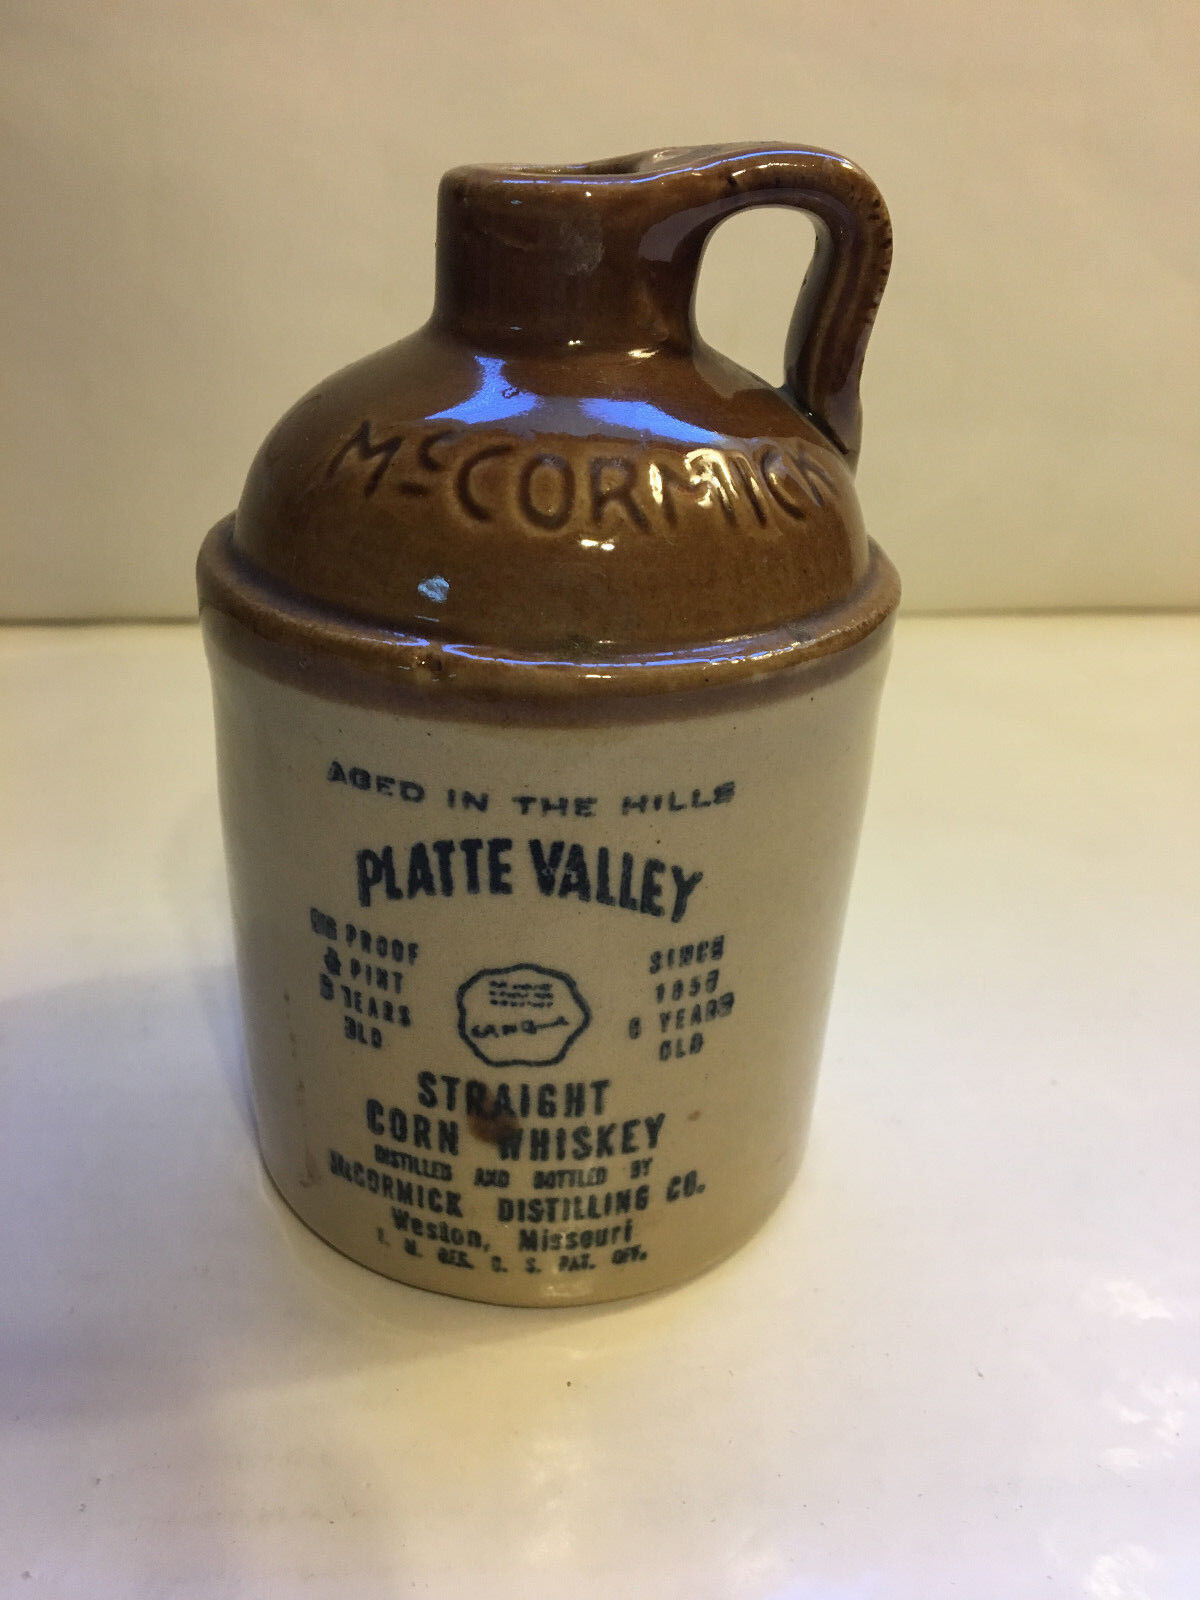 Small Brown Jug, McCormick Platte Valley Straight Corn Whiskey 219-1975, 11D16